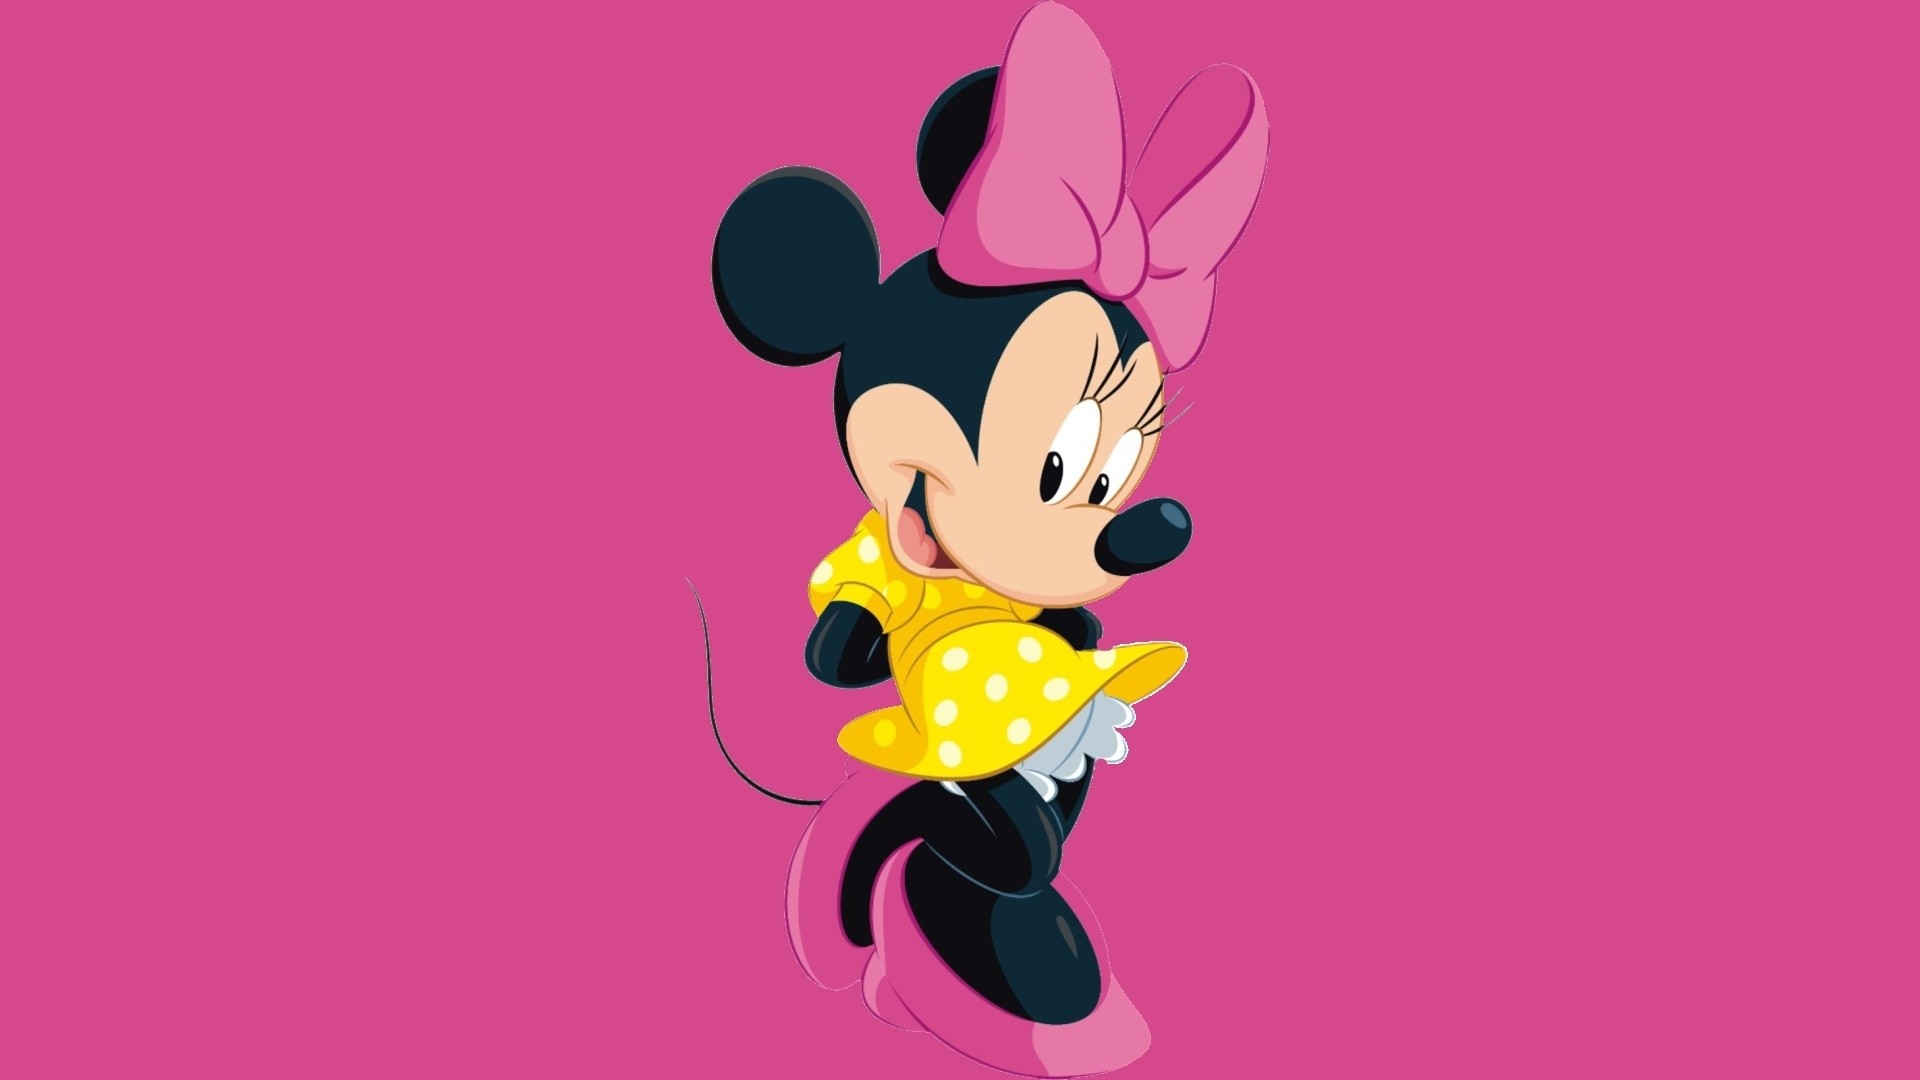 Disney Junior Disney Mickey Mouse Minnie Photo Mural Wallpaper for  Children's Room, Paper, Multi-Colour, 0.1 x 160 x 115 cm : Amazon.co.uk:  Baby Products